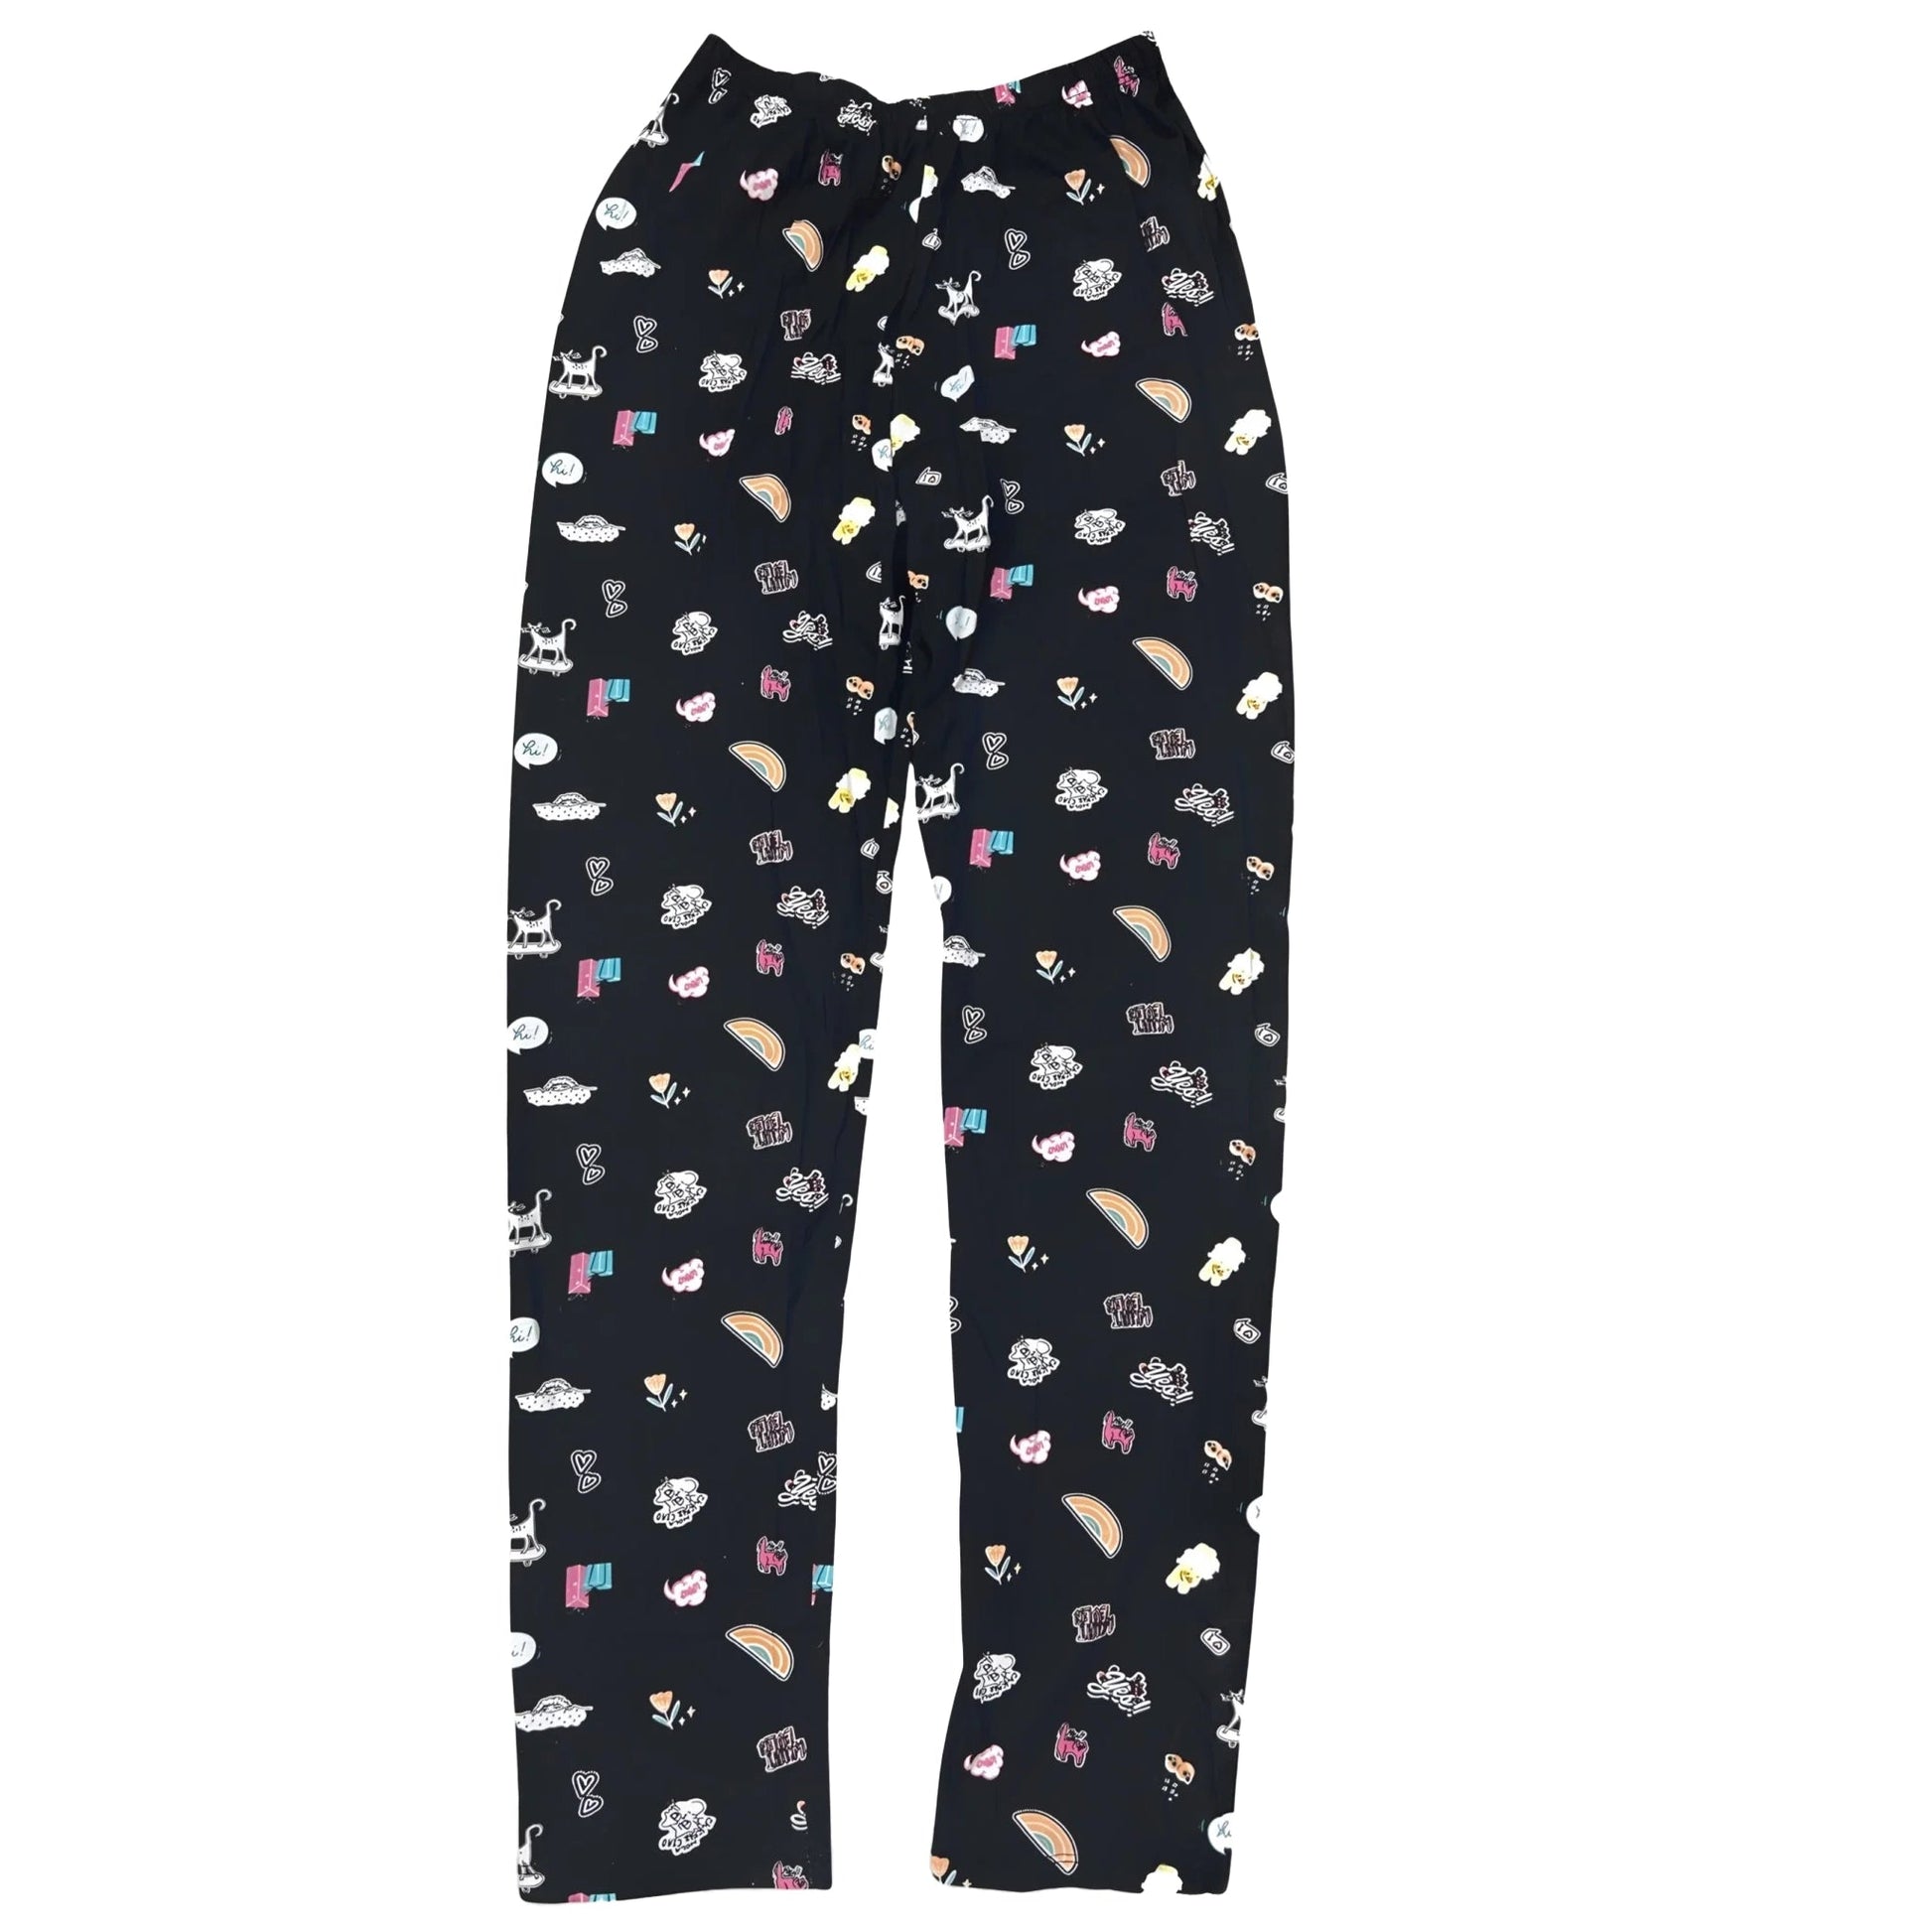 Boys trouser|Multicolor and Stretchable waist